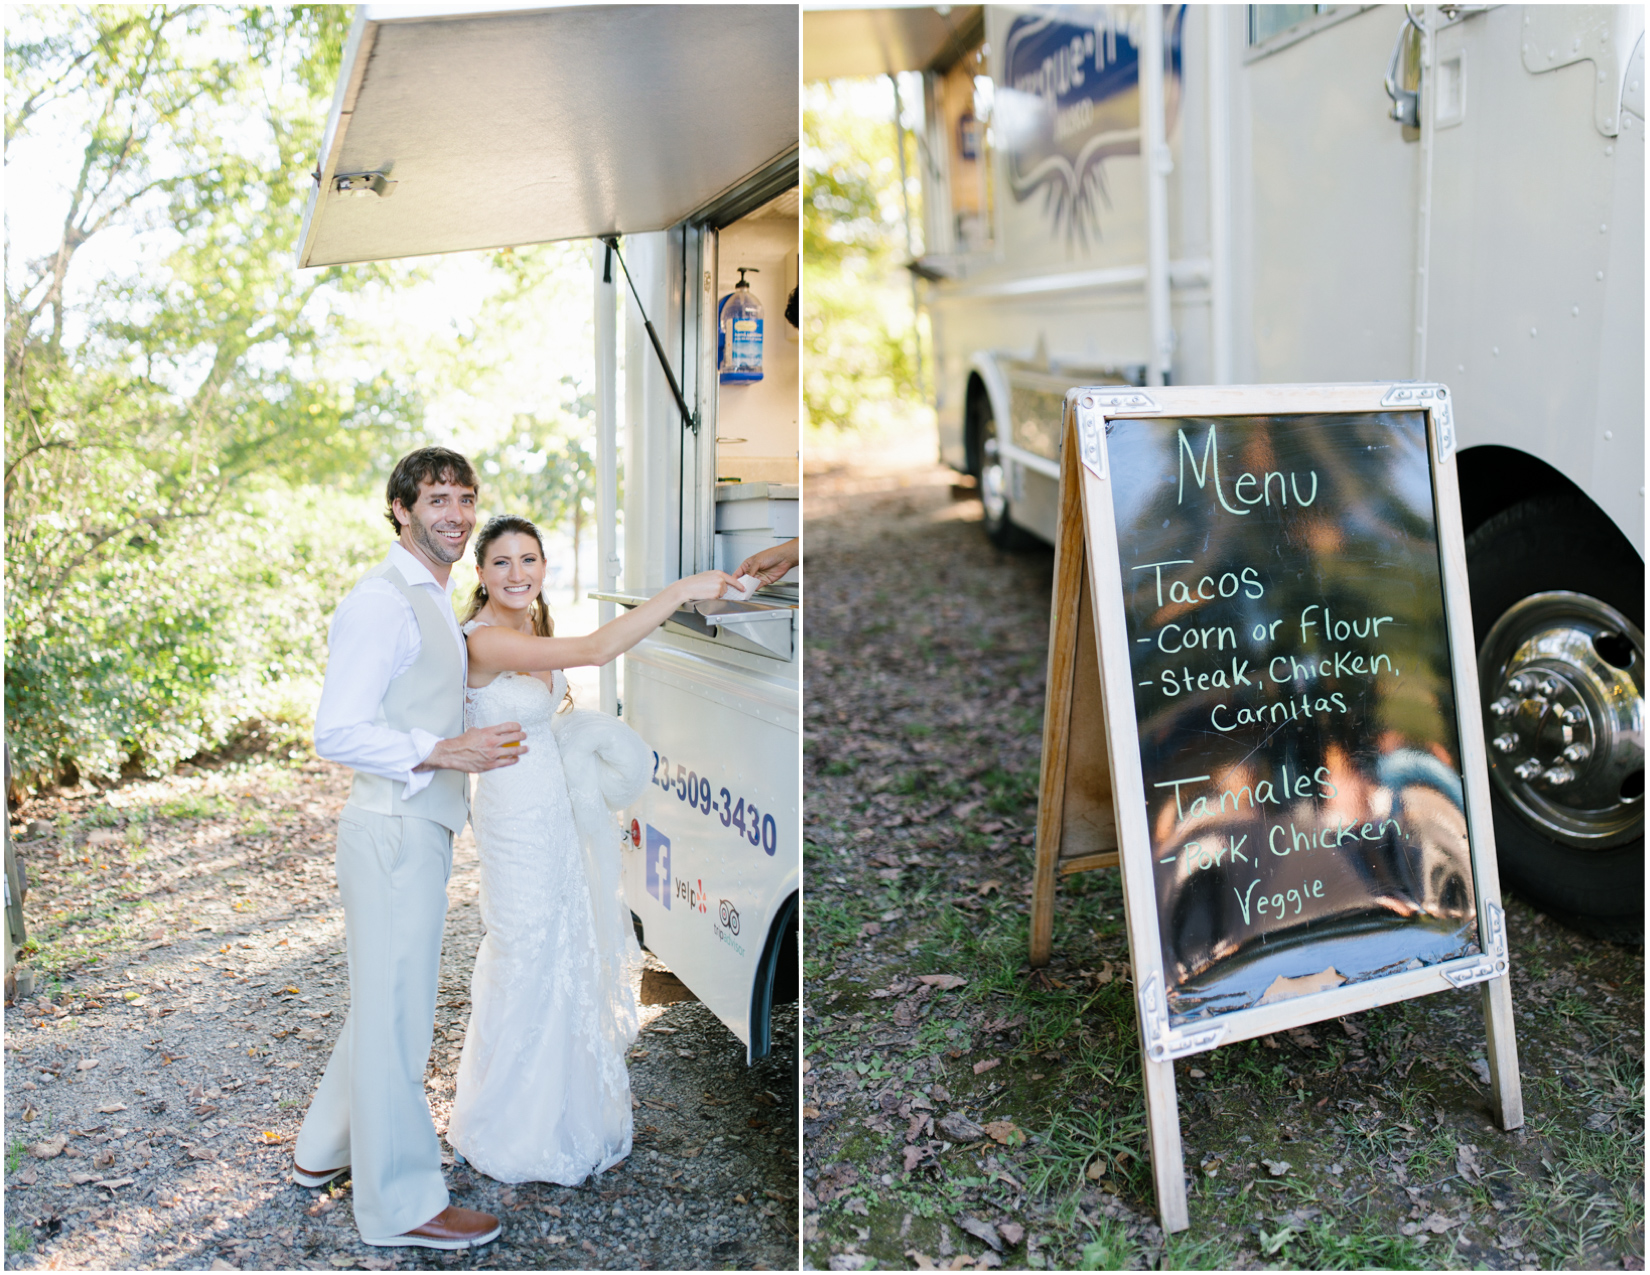 Tennessee River Place Wedding | Chattanooga, TN Wedding | Beautiful Wedding Details | Taco Truck on Wedding Day | Southern Bride | VSCO | Emma Rose Company.jpg